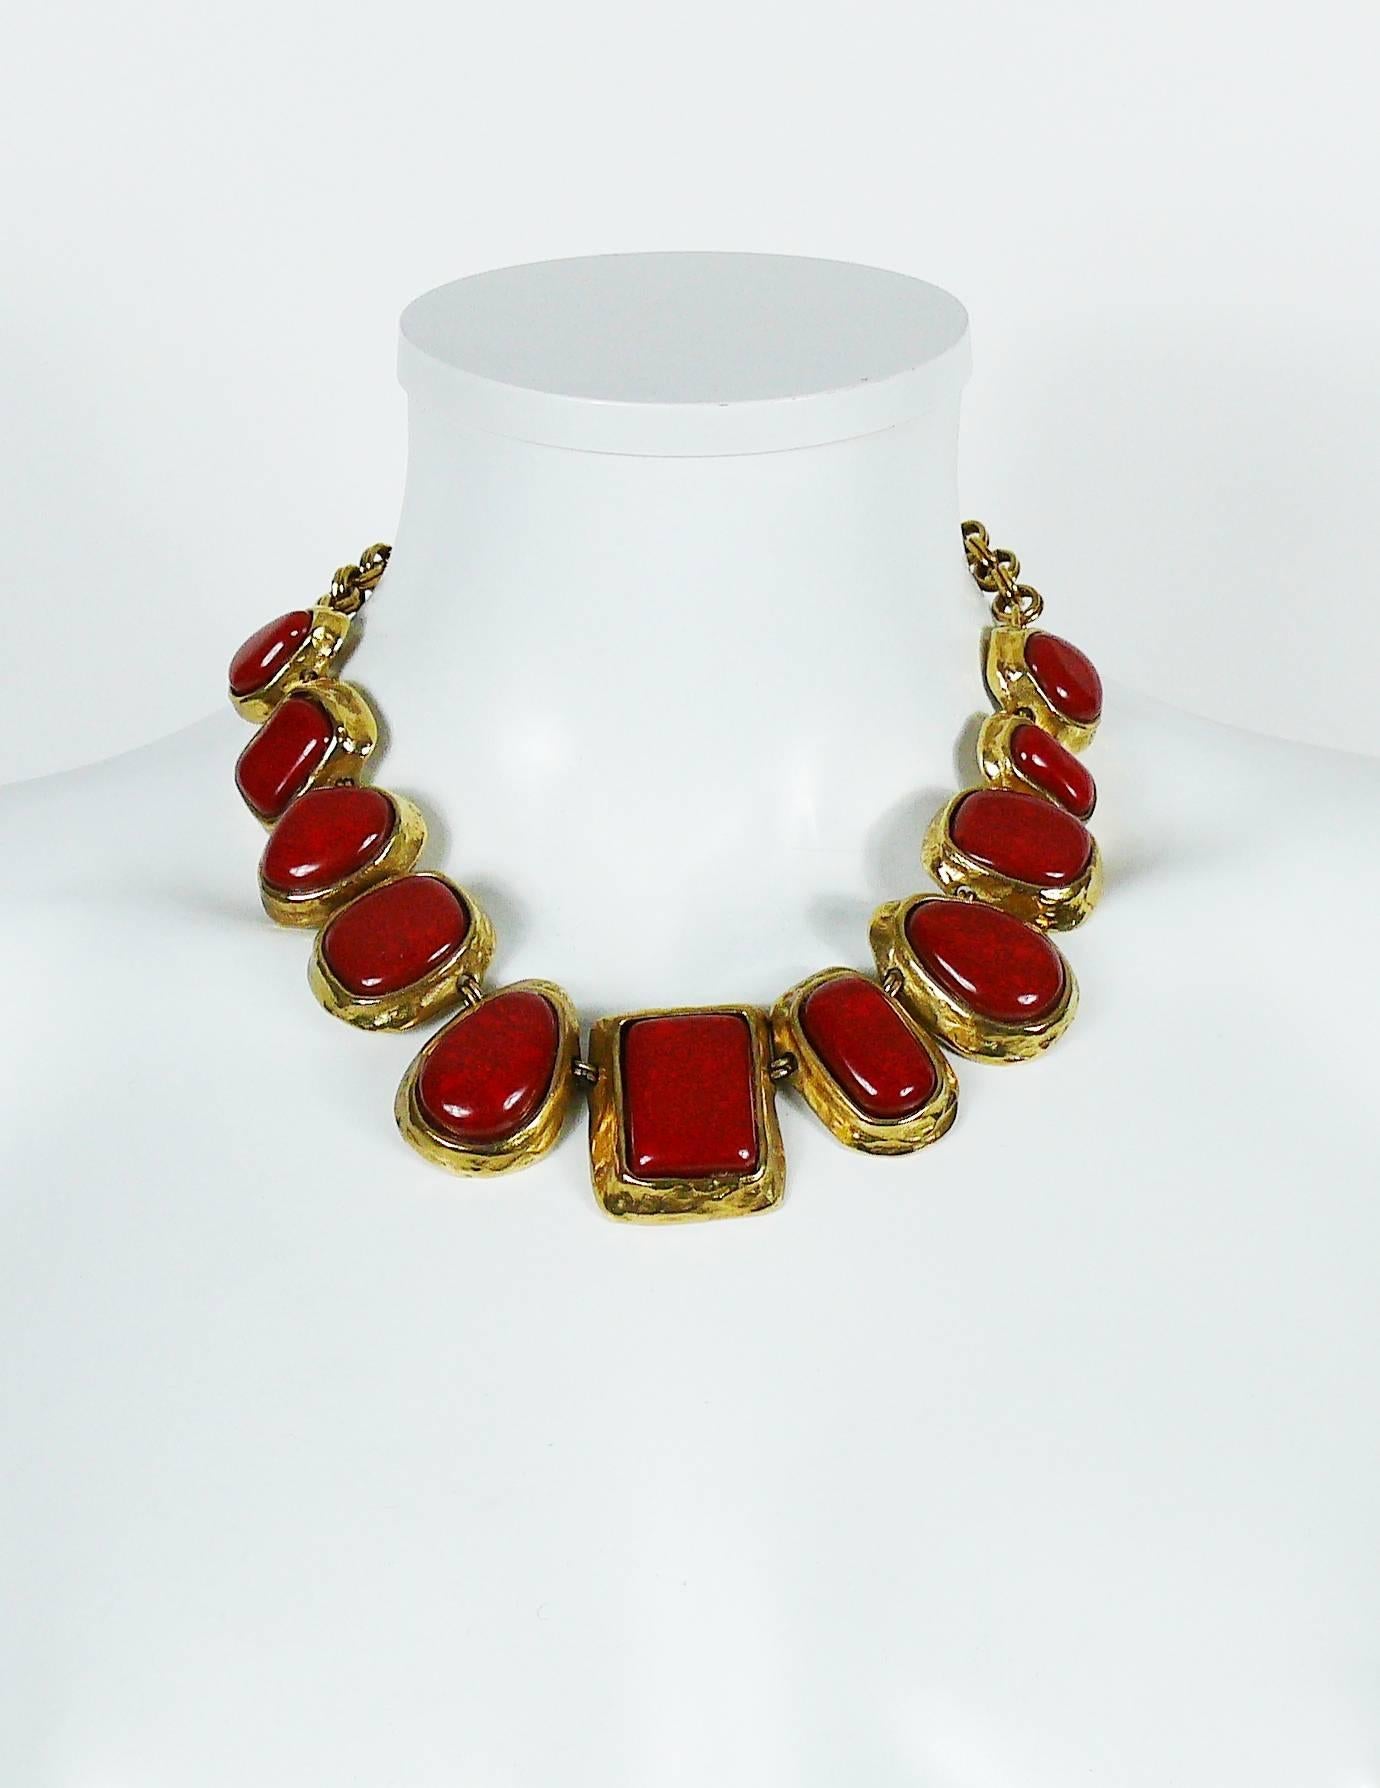 YVES SAINT LAURENT gorgeous vintage necklace featuring faux coral resin cabochons in texured irregular shape gold tone links.

T-bar closure.
Love hearts clasps.

Embossed with YVES SAINT LAURENT signature on the hearts.
Made in France.

Indicative